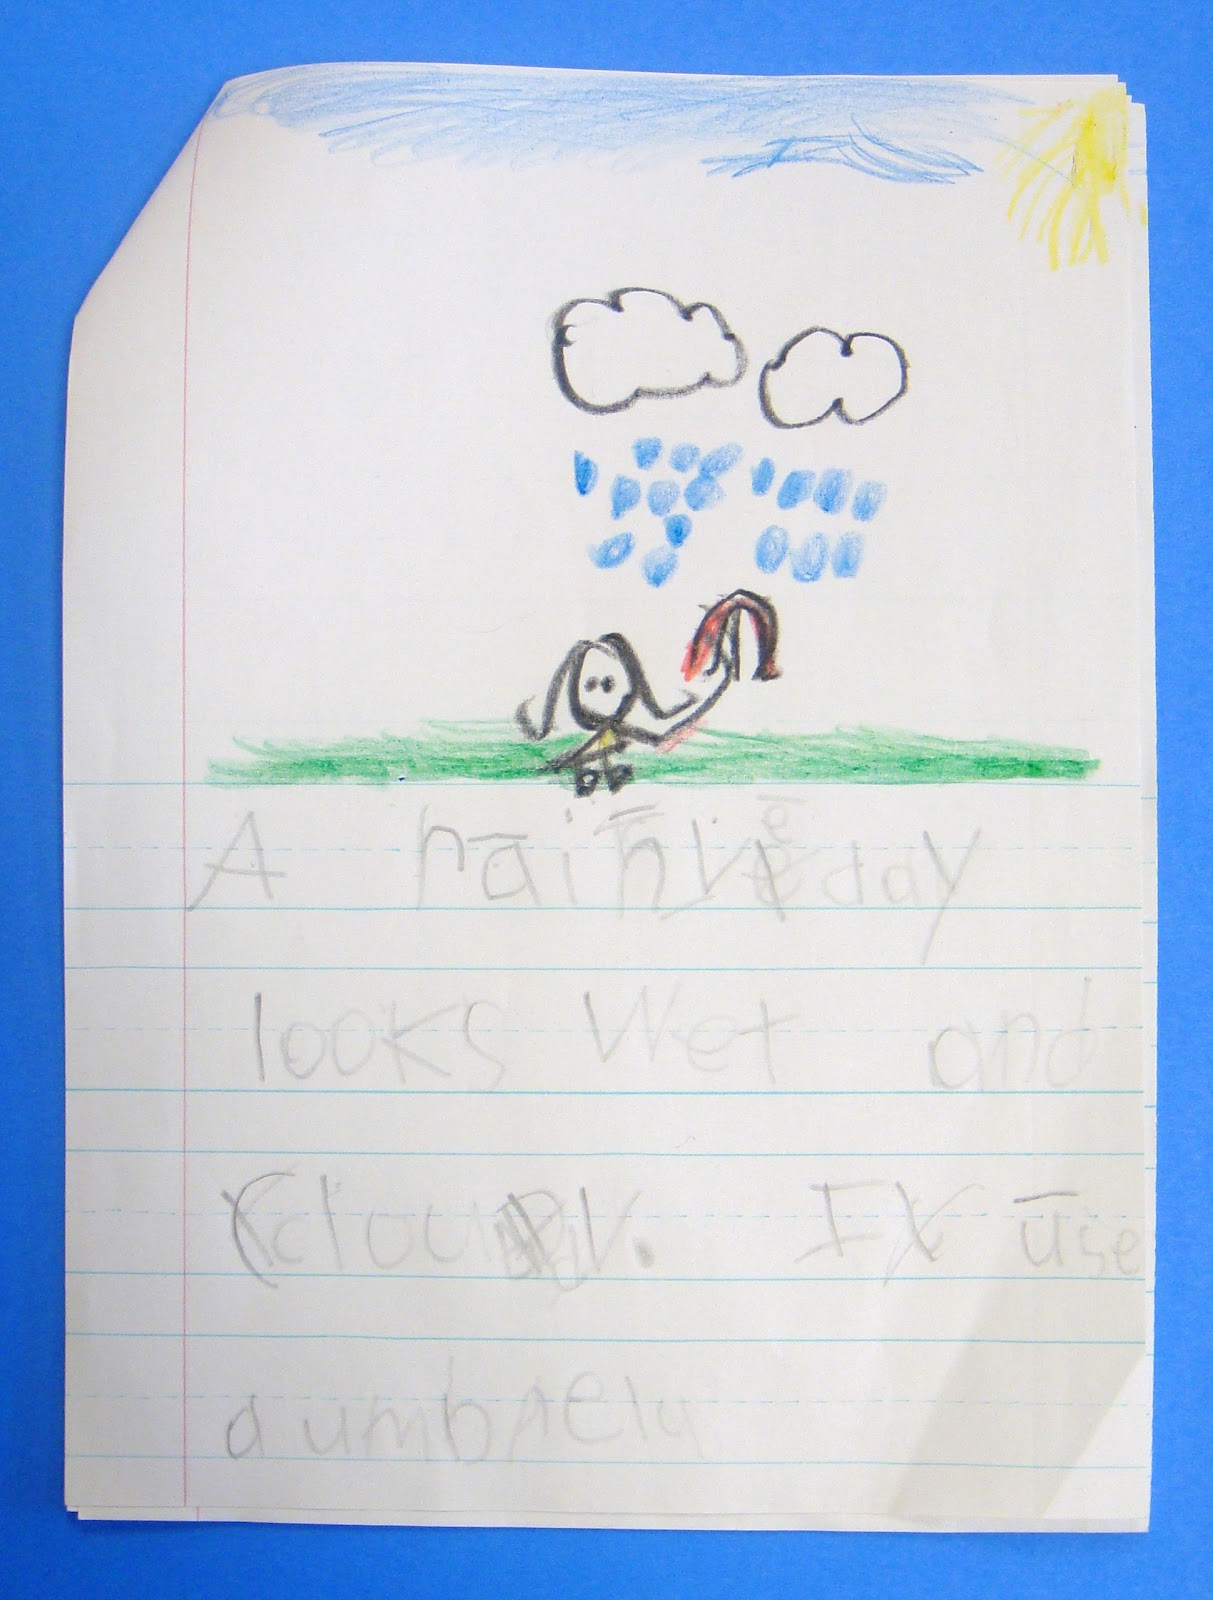 A rainy day essay for kids